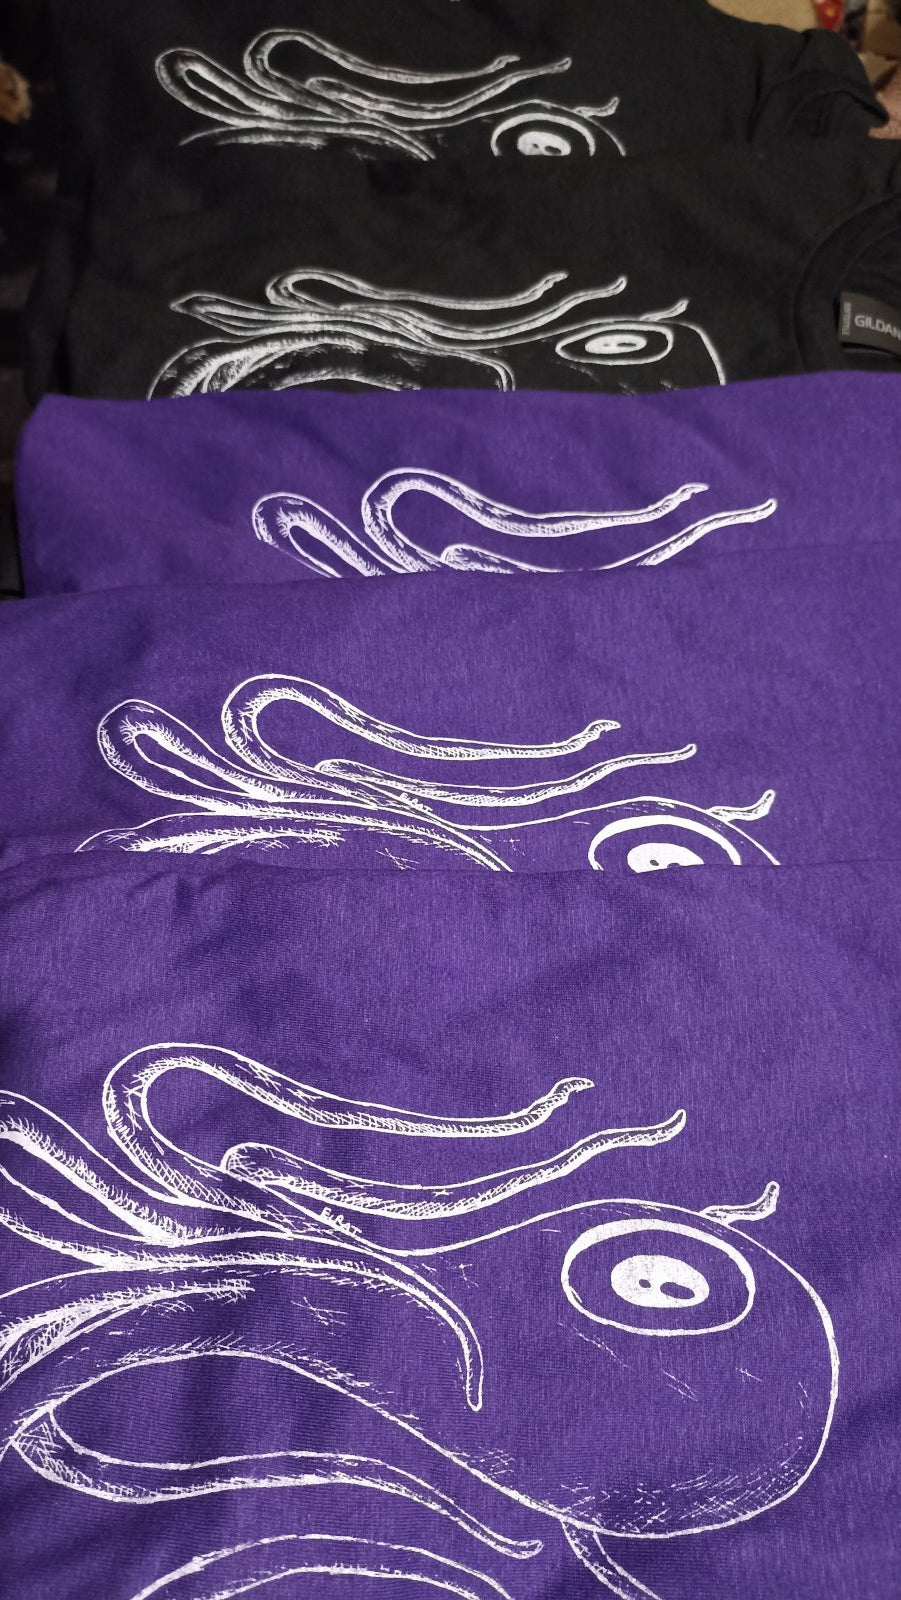 Octoclops Tees in  row, designed and printed by ELRat